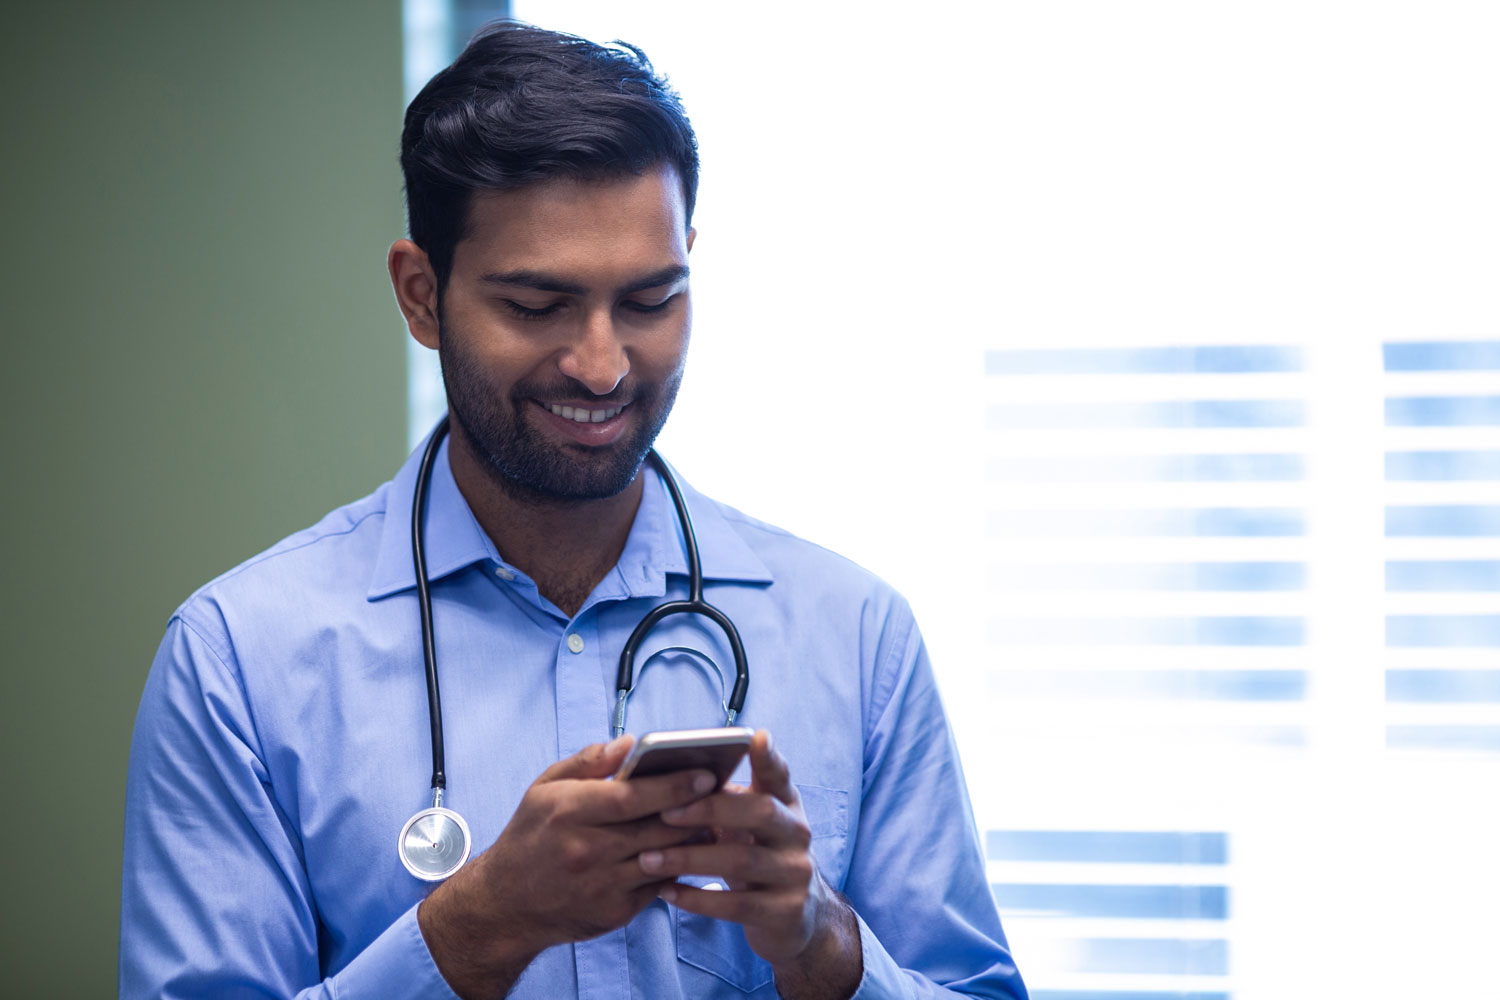 Male health professional looking at his phone as he does his online training